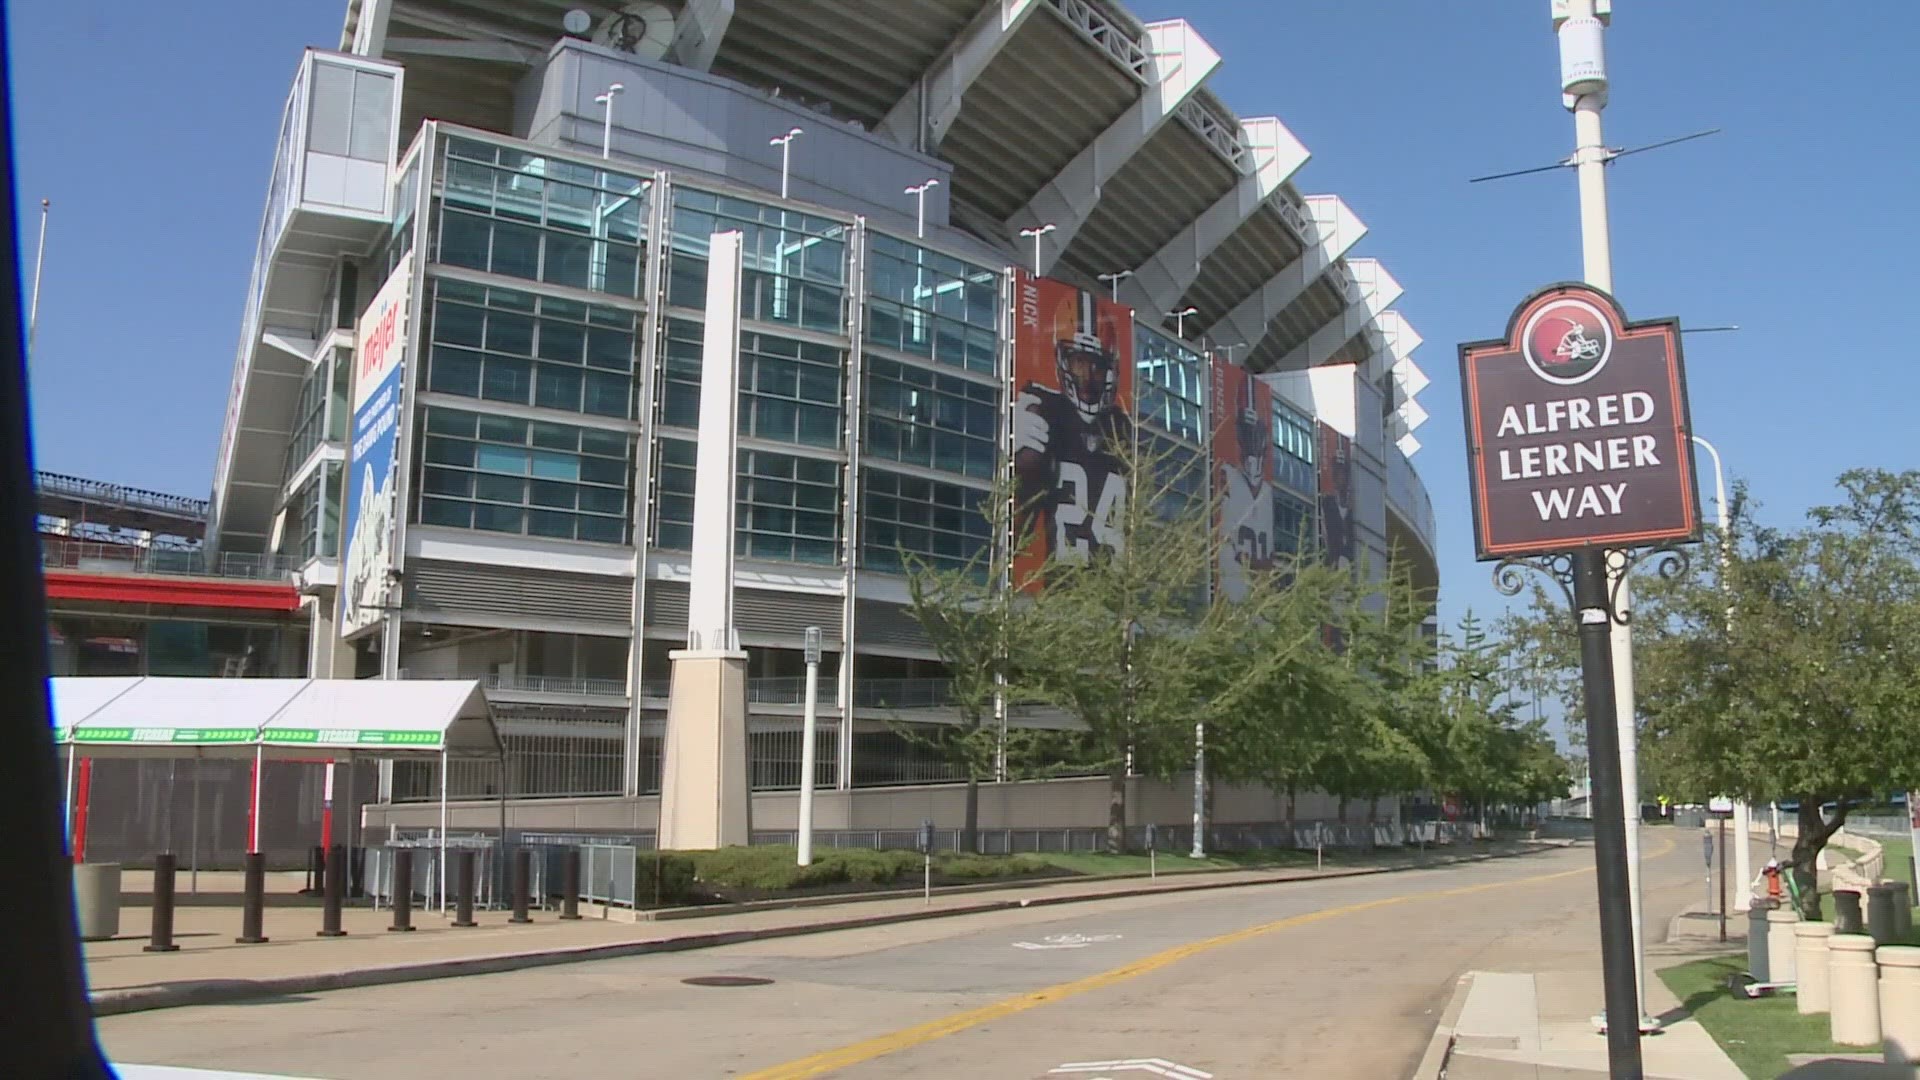 Haslam's comments included major insight into future plans for a stadium renovation or potential new, domed stadium.